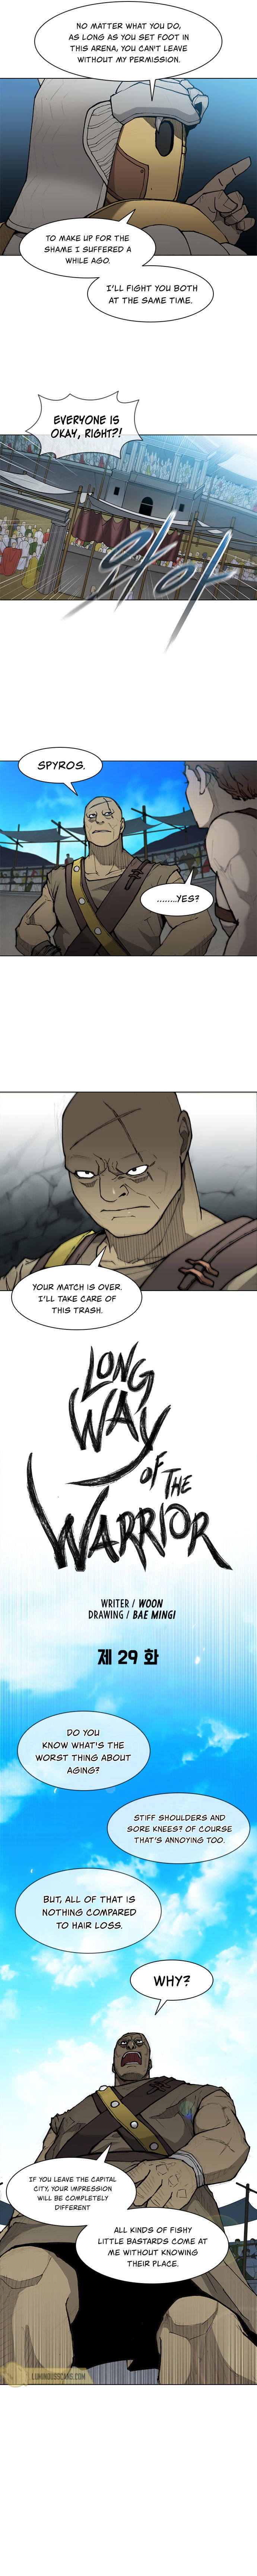 long-way-of-the-warrior-chap-29-10